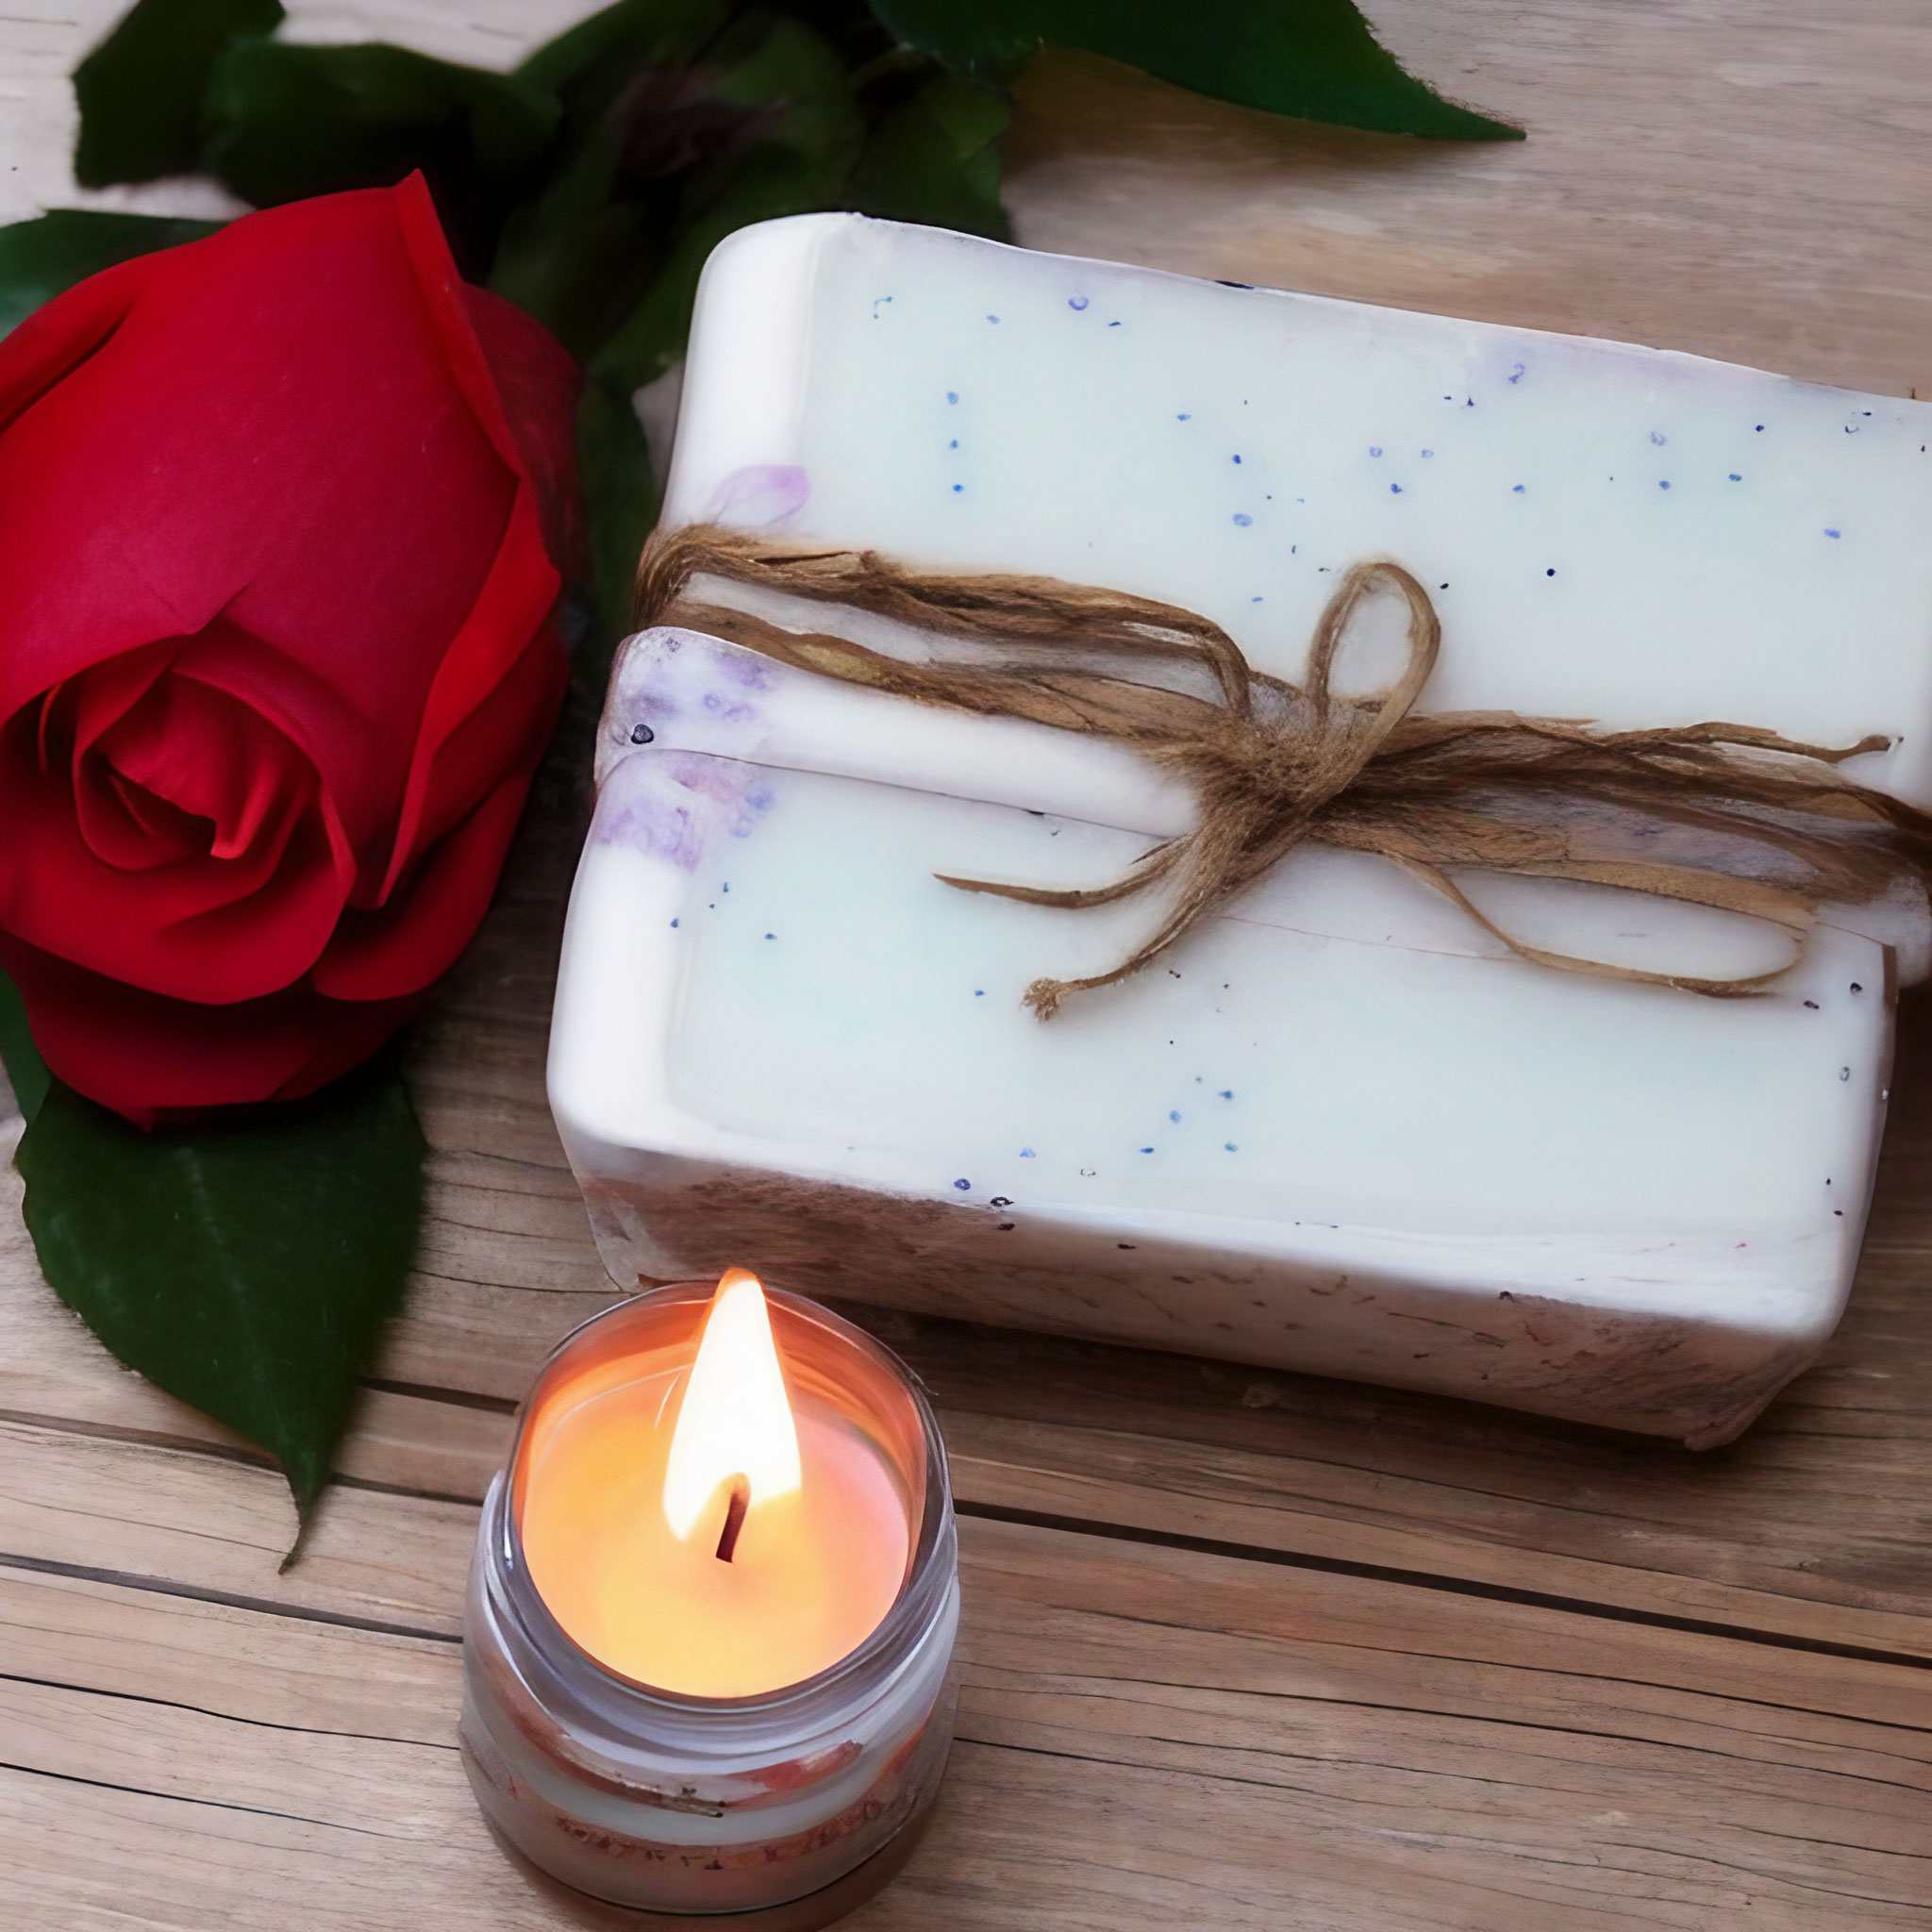 soap bar with lit candle and rose on wooden table